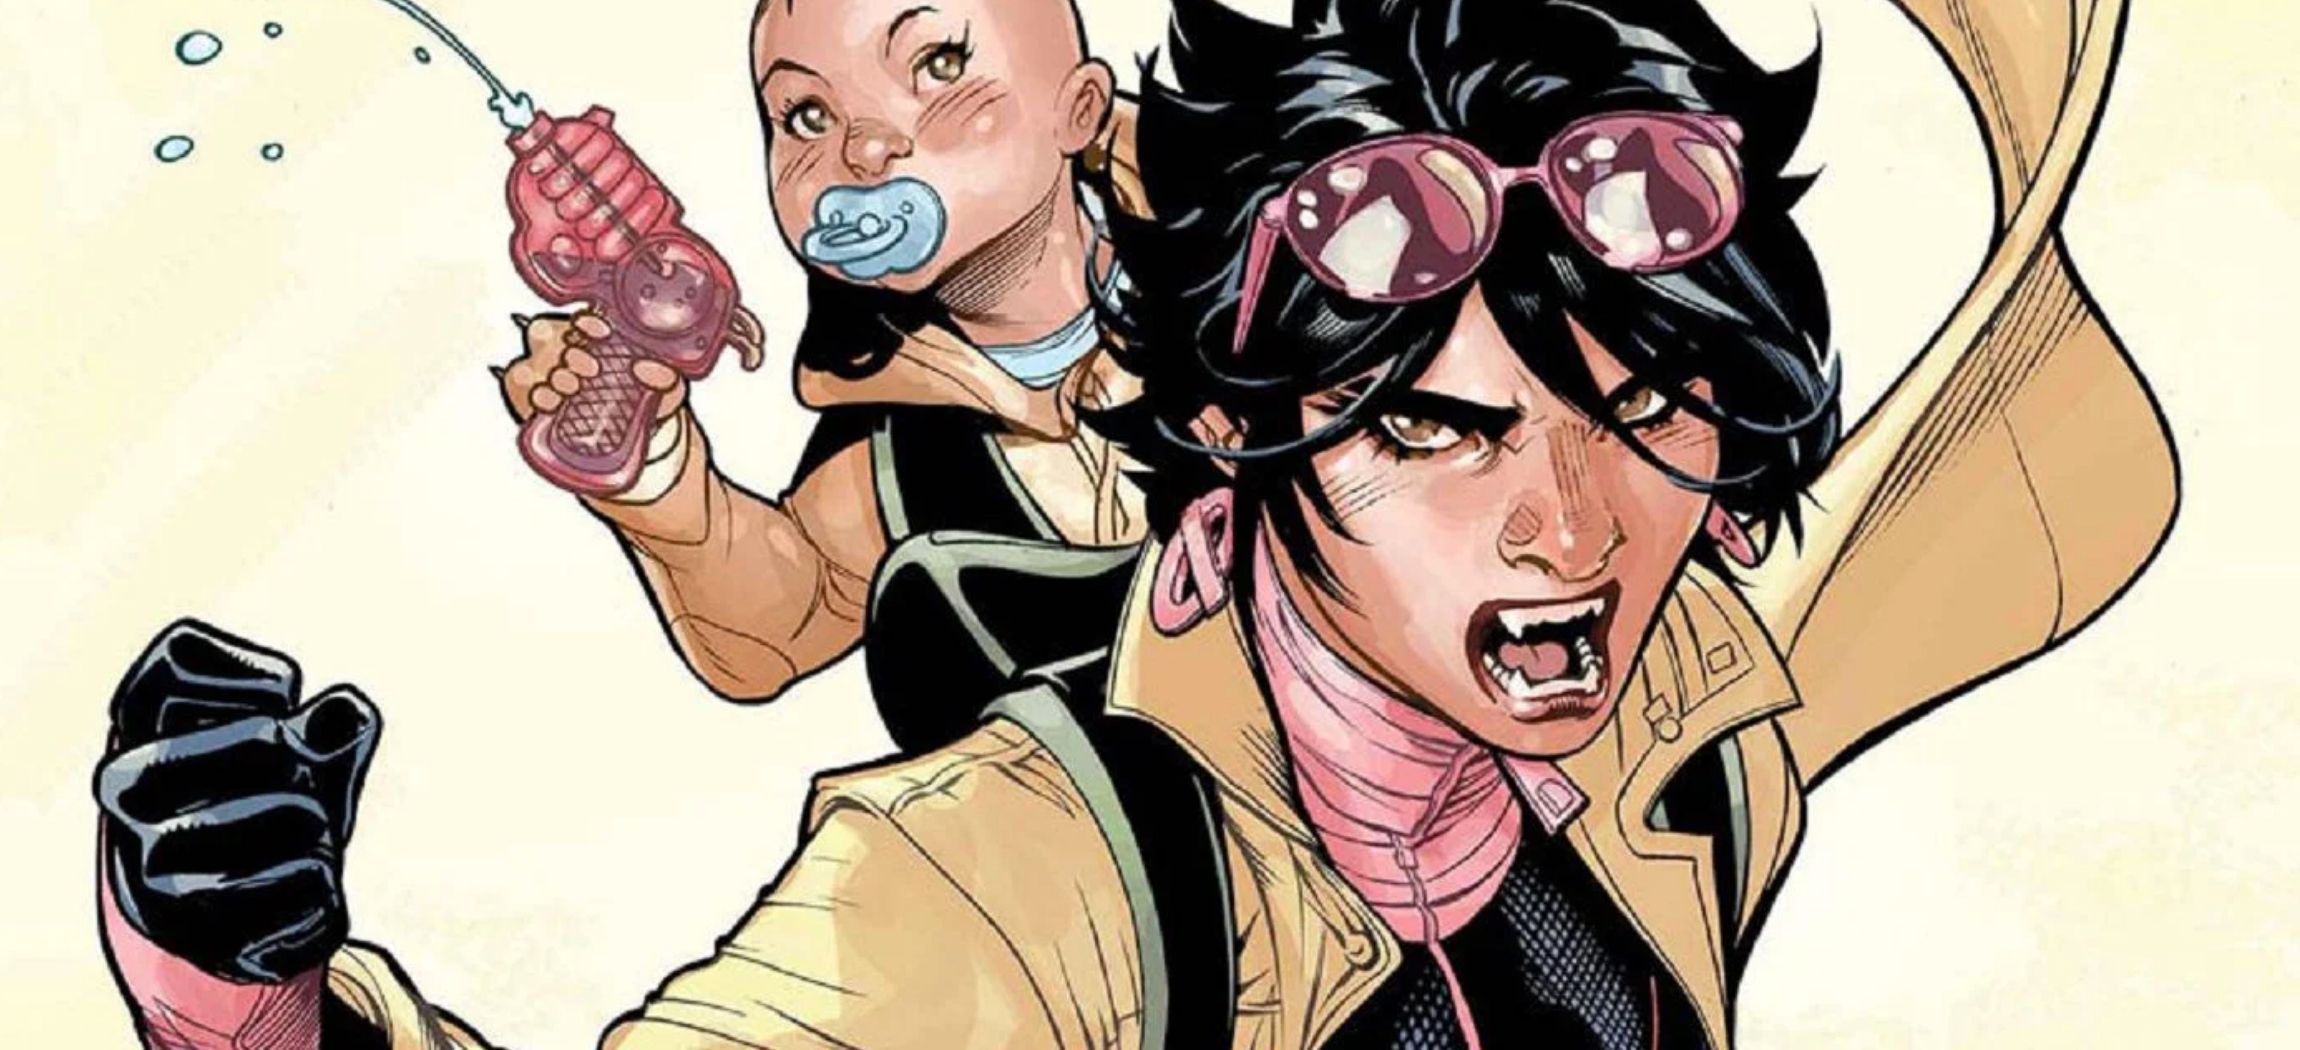 Jubilee bares her fangs and carries a baby on her back in Marvel comics